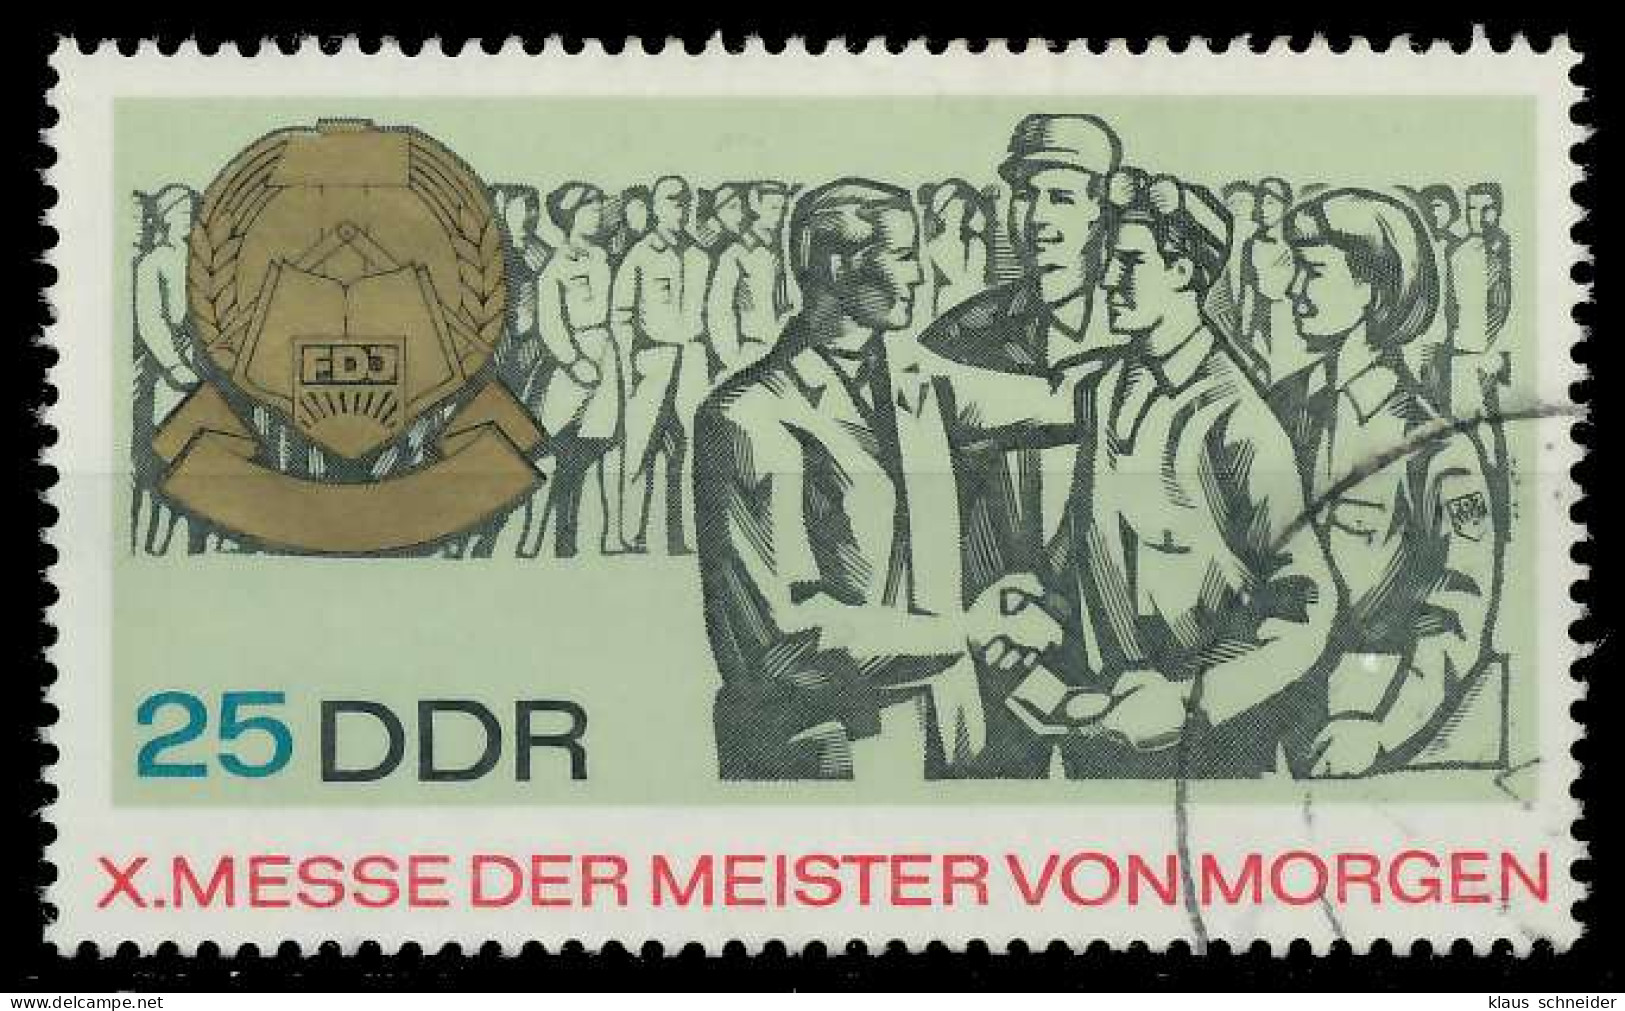 DDR 1967 Nr 1322 Gestempelt X11B3CE - Used Stamps